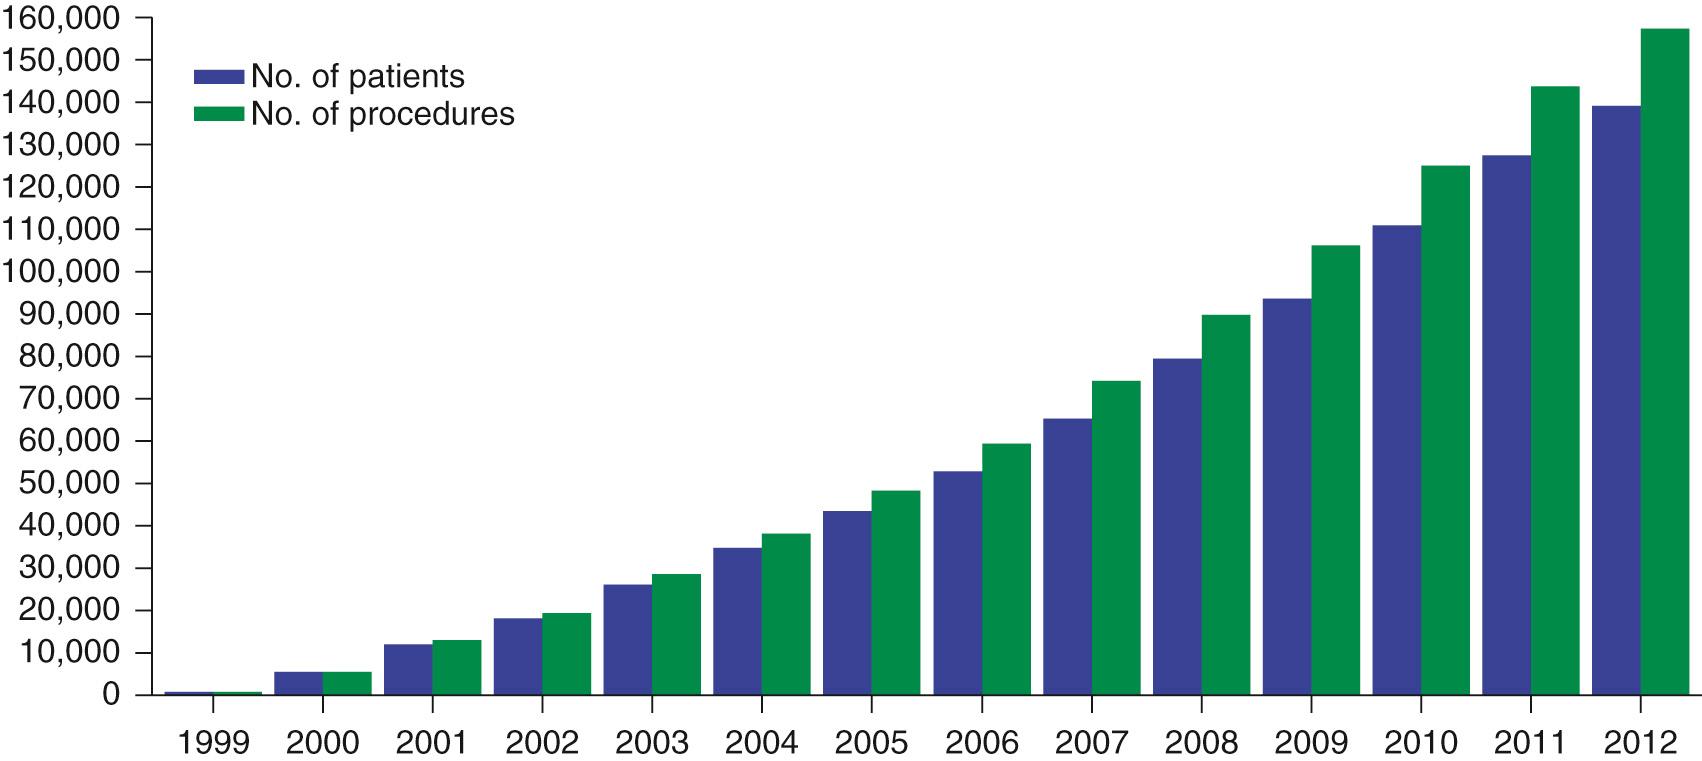 FIGURE 133-4, The annual growth in the European Association for Cardio-Thoracic Surgery (EACTS) Congenital Database by both number of patients and number of operations. As of May 2013, the EACTS Congenital Heart Surgery Database contained 157,772 operations performed in 130,534 patients. As of May, 2013, the EACTS Congenital Heart Surgery Database had 348 centers from 76 countries registered, with 173 active centers from 46 countries submitting data.